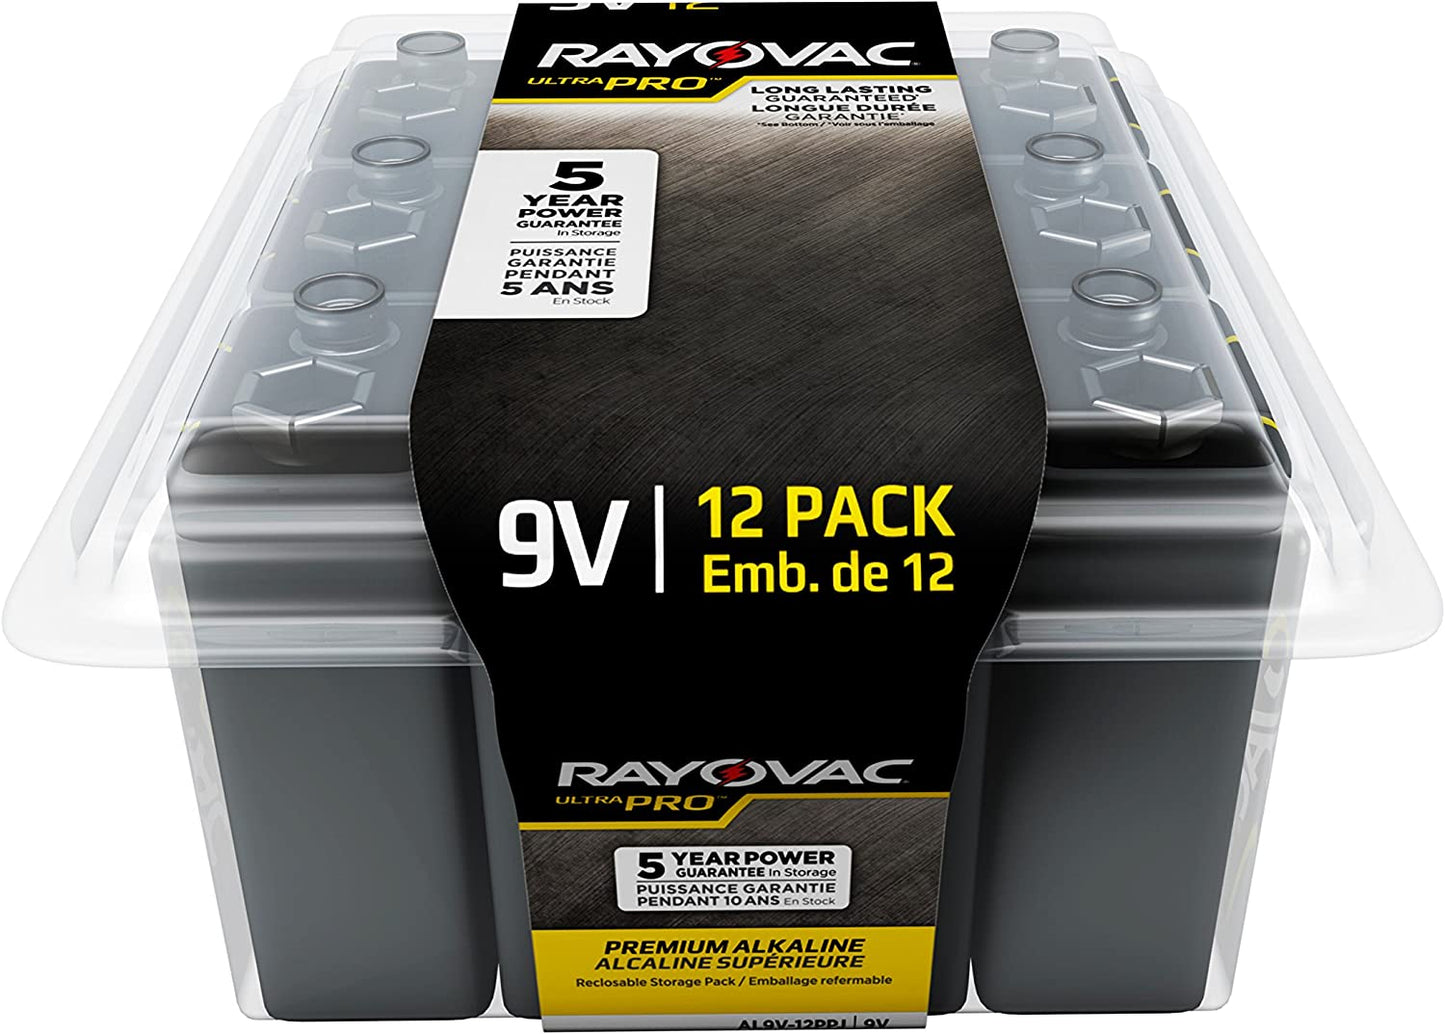 2 pack of Rayovac High Energy Size 9V Batteries